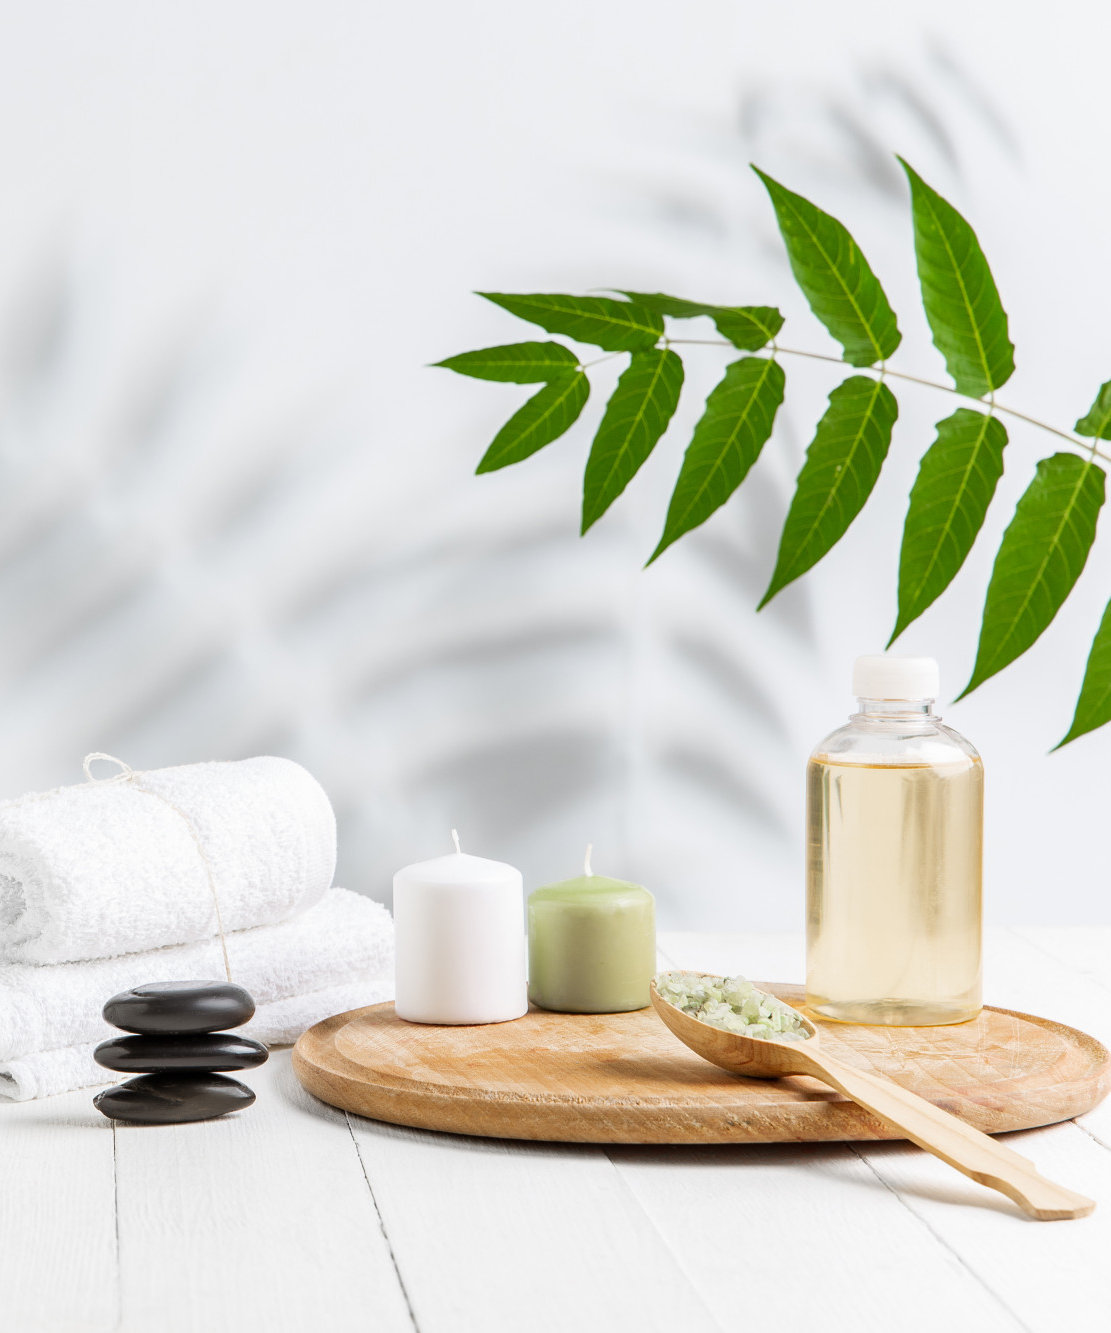 Beauty treatments and holistic therapies